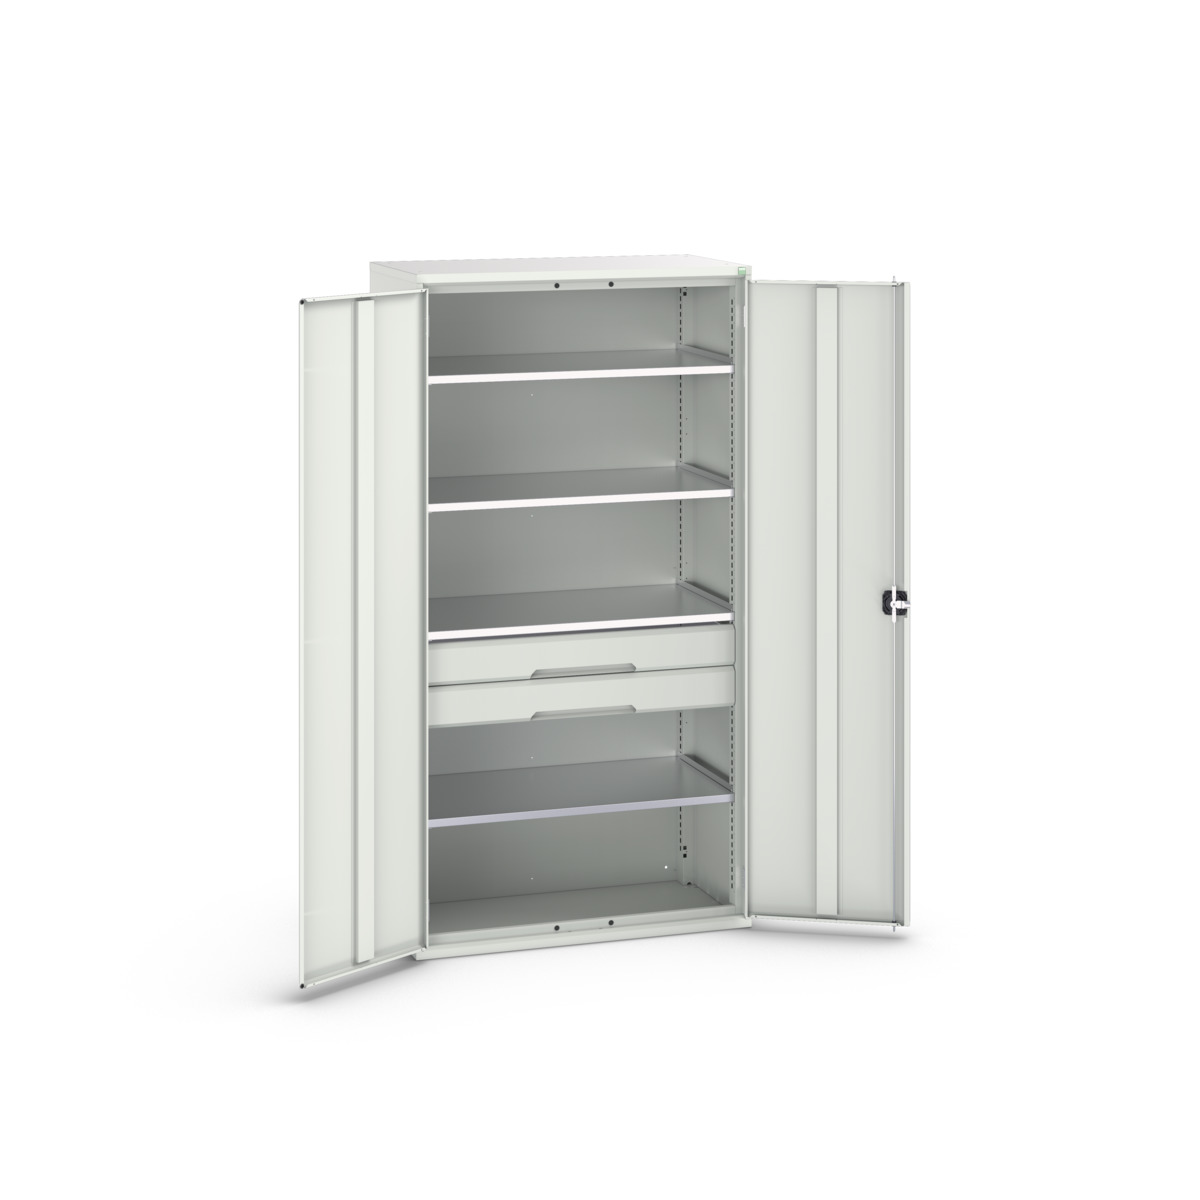 16926574.16 - verso kitted cupboard